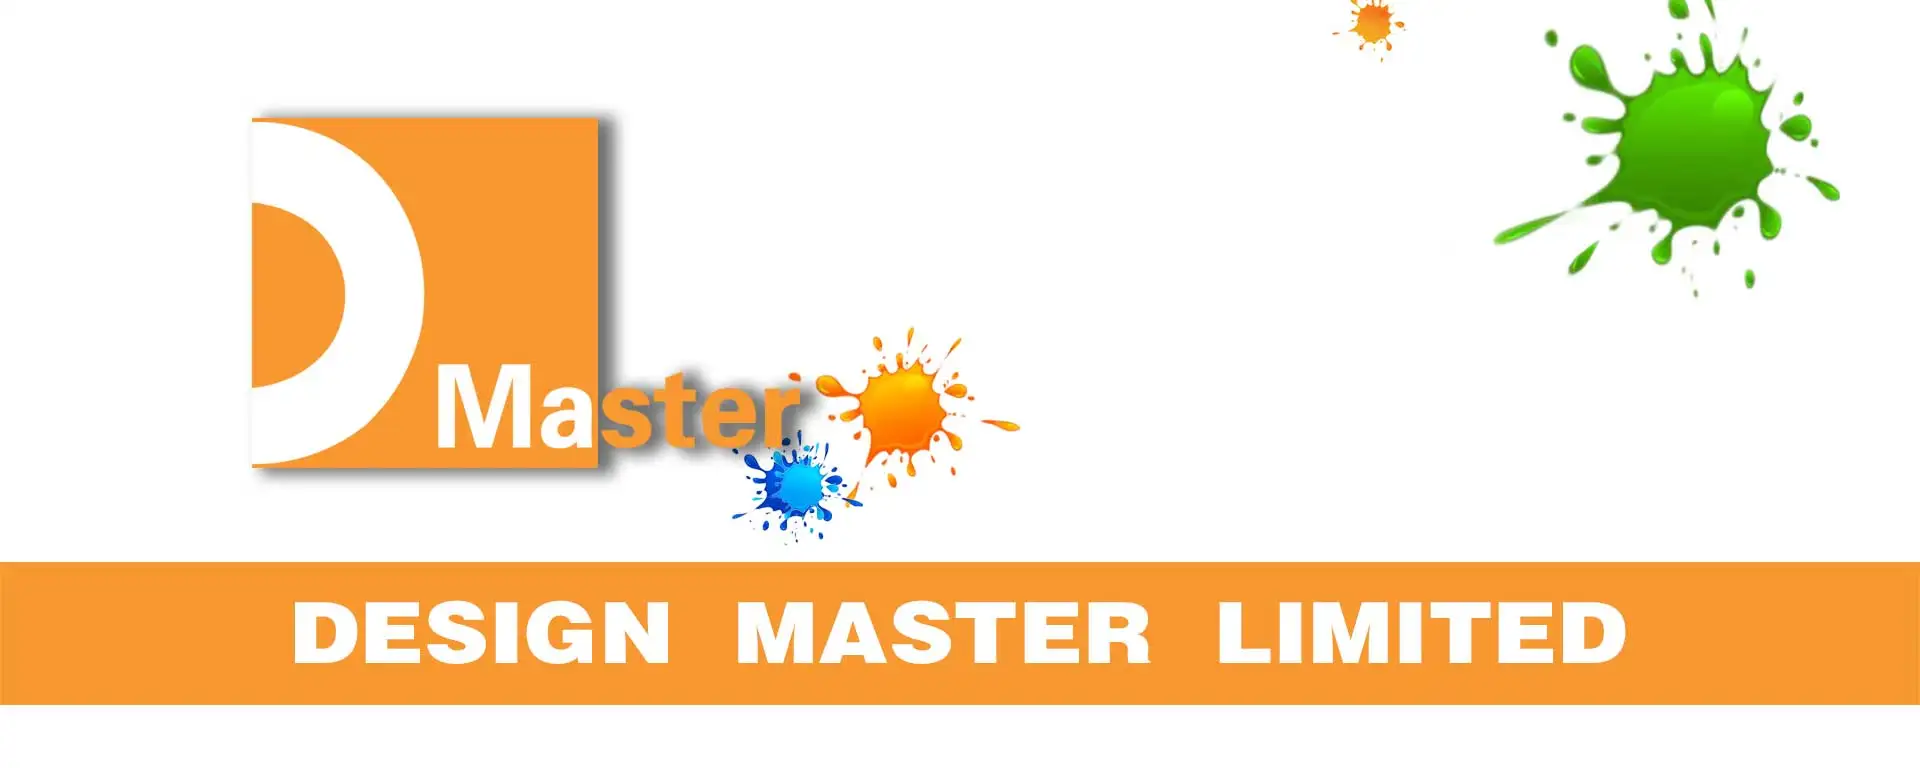 Master limited